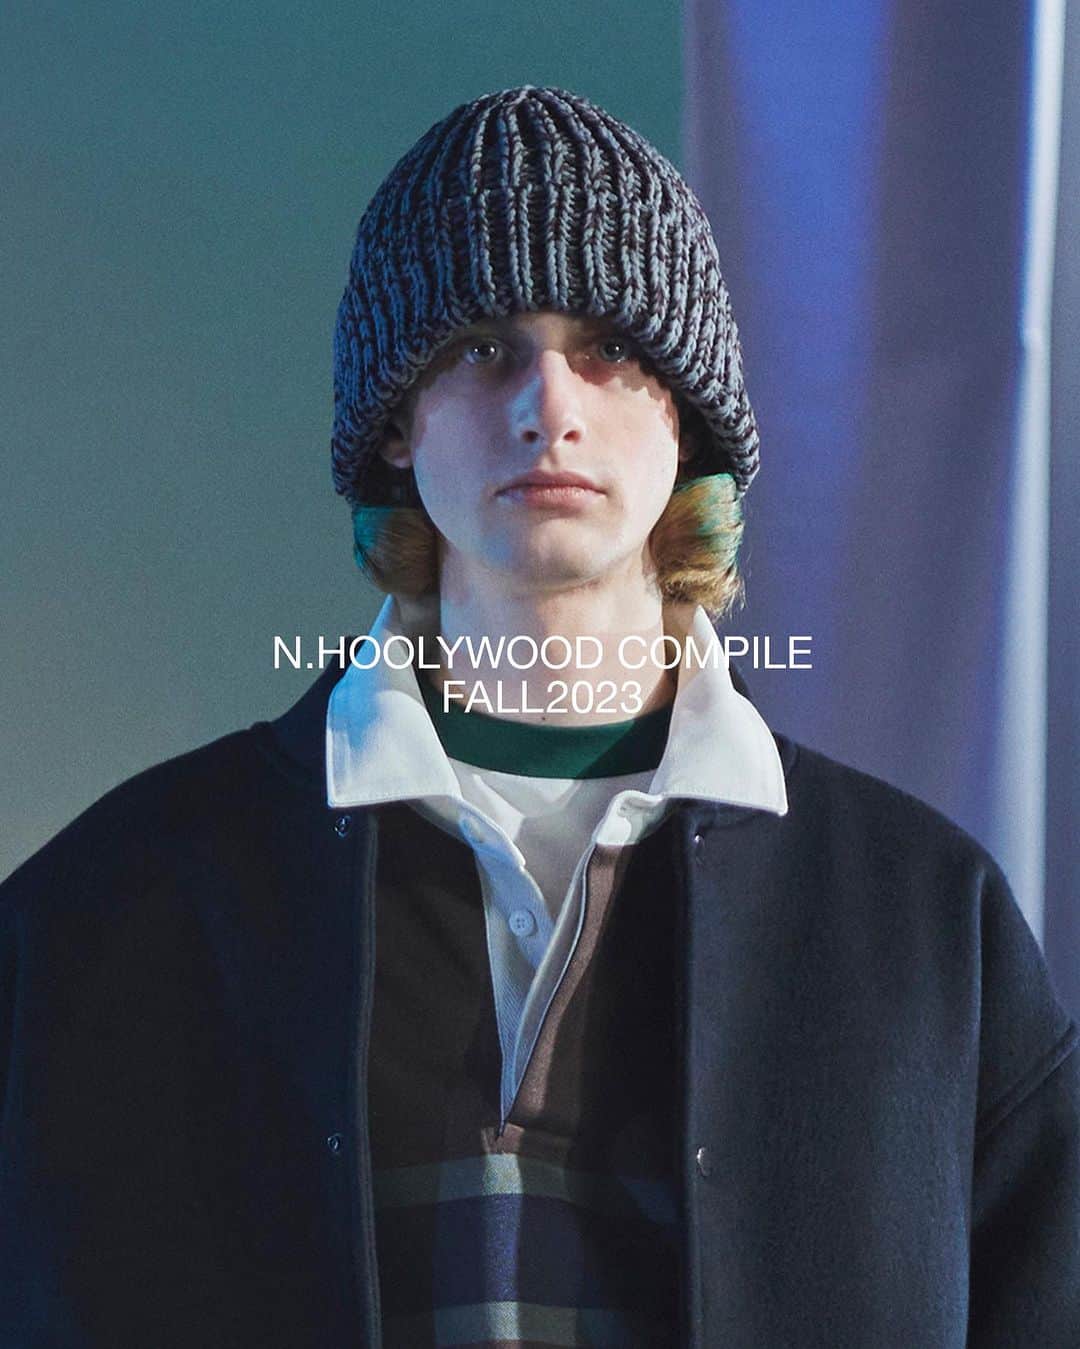 N.ハリウッドのインスタグラム：「Tomorrow! N.HOOLYWOOD COMPILE FALL2023 11th delivery items will be available at   #misterhollywood  #misterhollywood_OSAKA #nhoolywood_ISETAN_MENS #nhoolywood_ROPPONGI #nhoolywood_GINZA #nhoolywood_NAGOYA #nhoolywood_FUKUOKA #nhoolywood_ZOZOVILLA #N_HOOLYWOOD_COM  #misterhollywood#nhoolywood#nhoolywoodcompile」